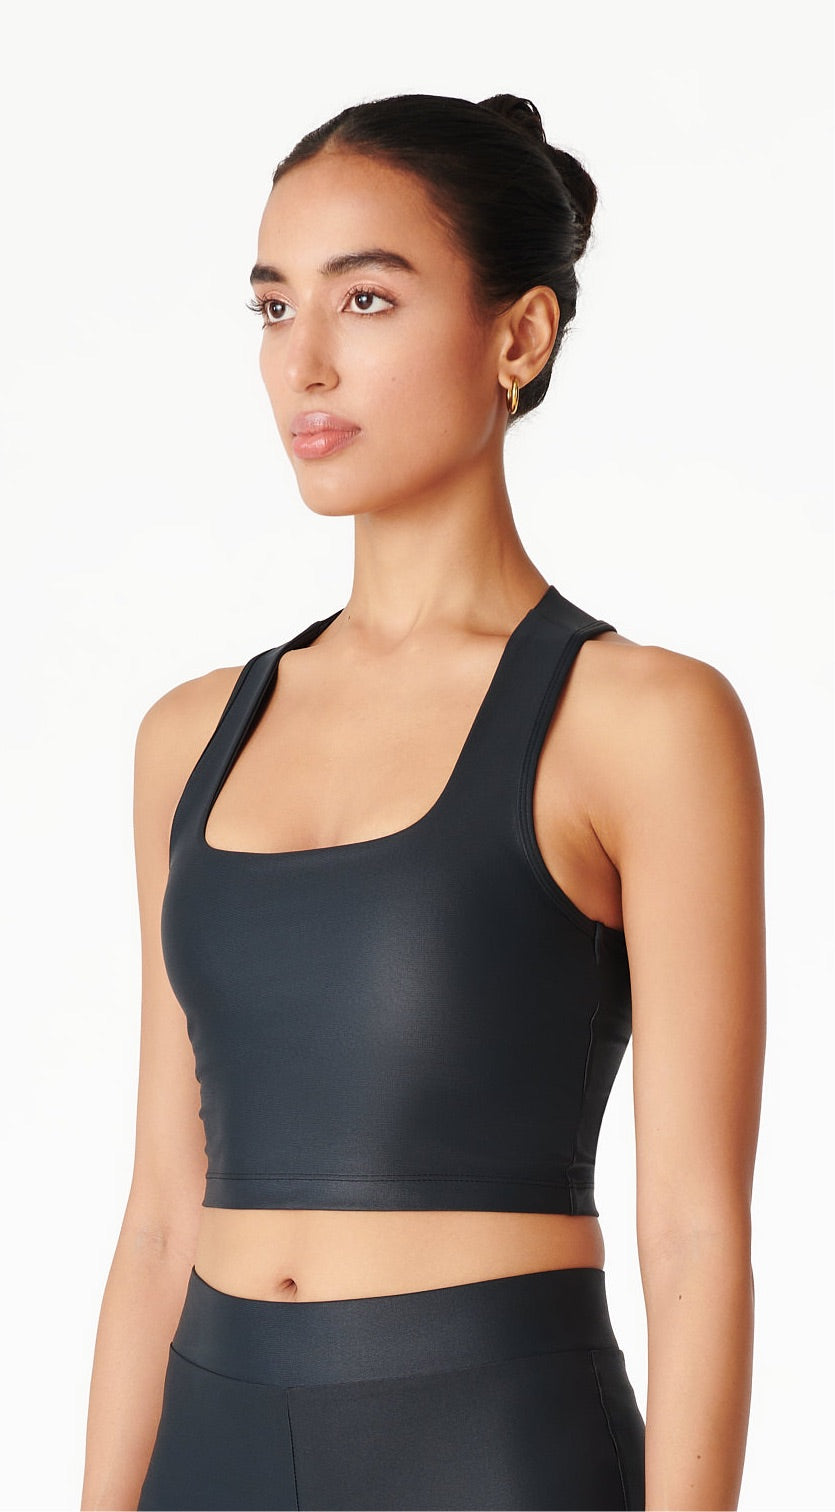 Crushed Pace Sports Bra, Buy Online